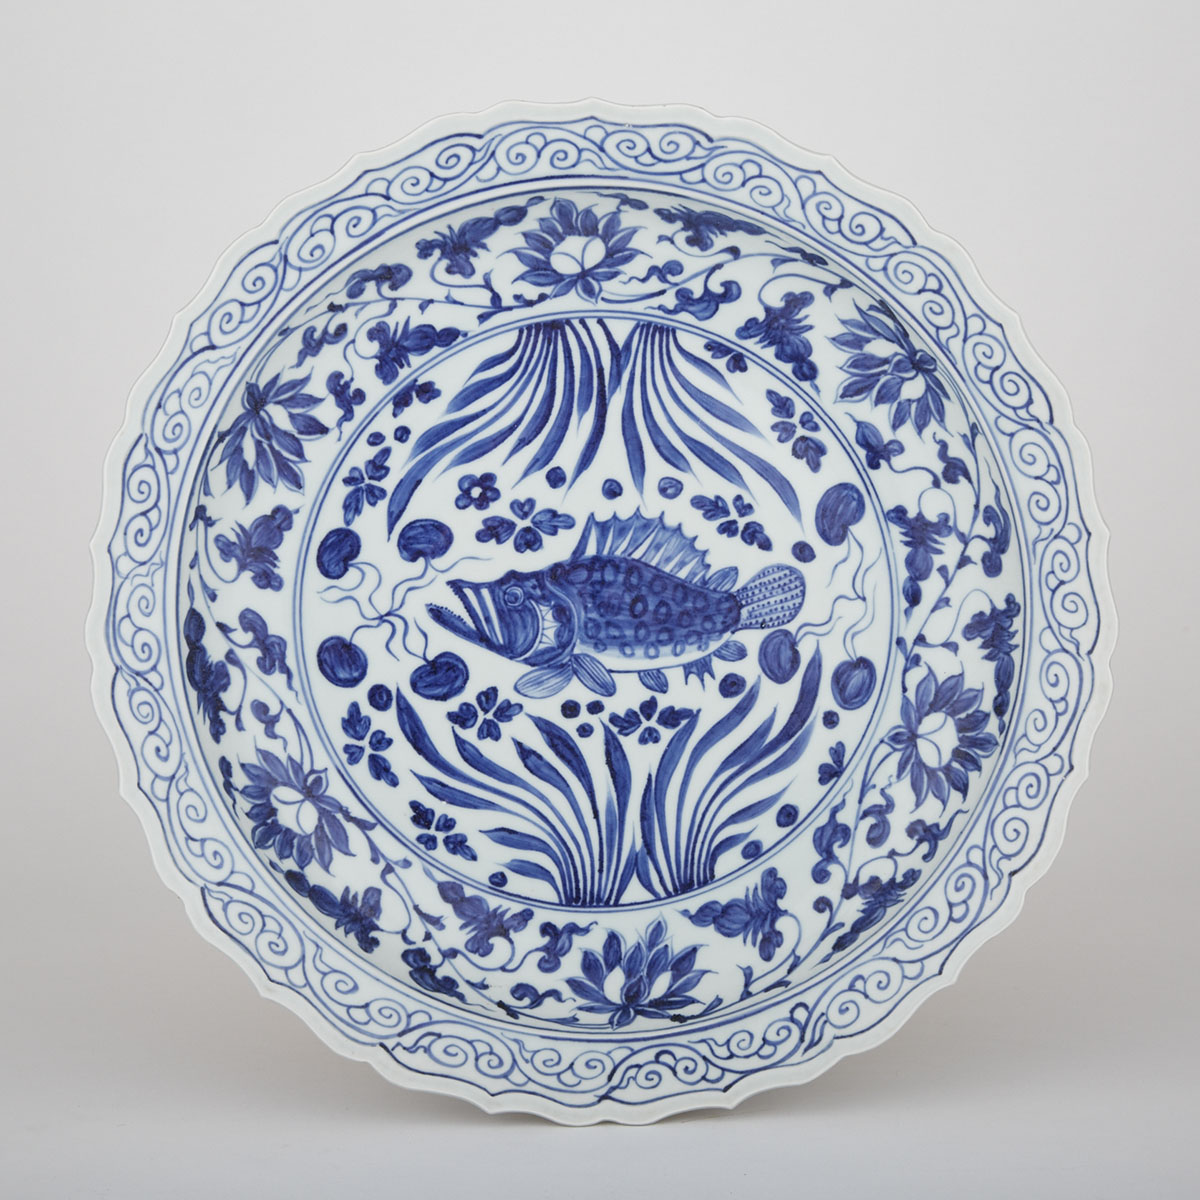 A Massive Blue and White Fish Charger